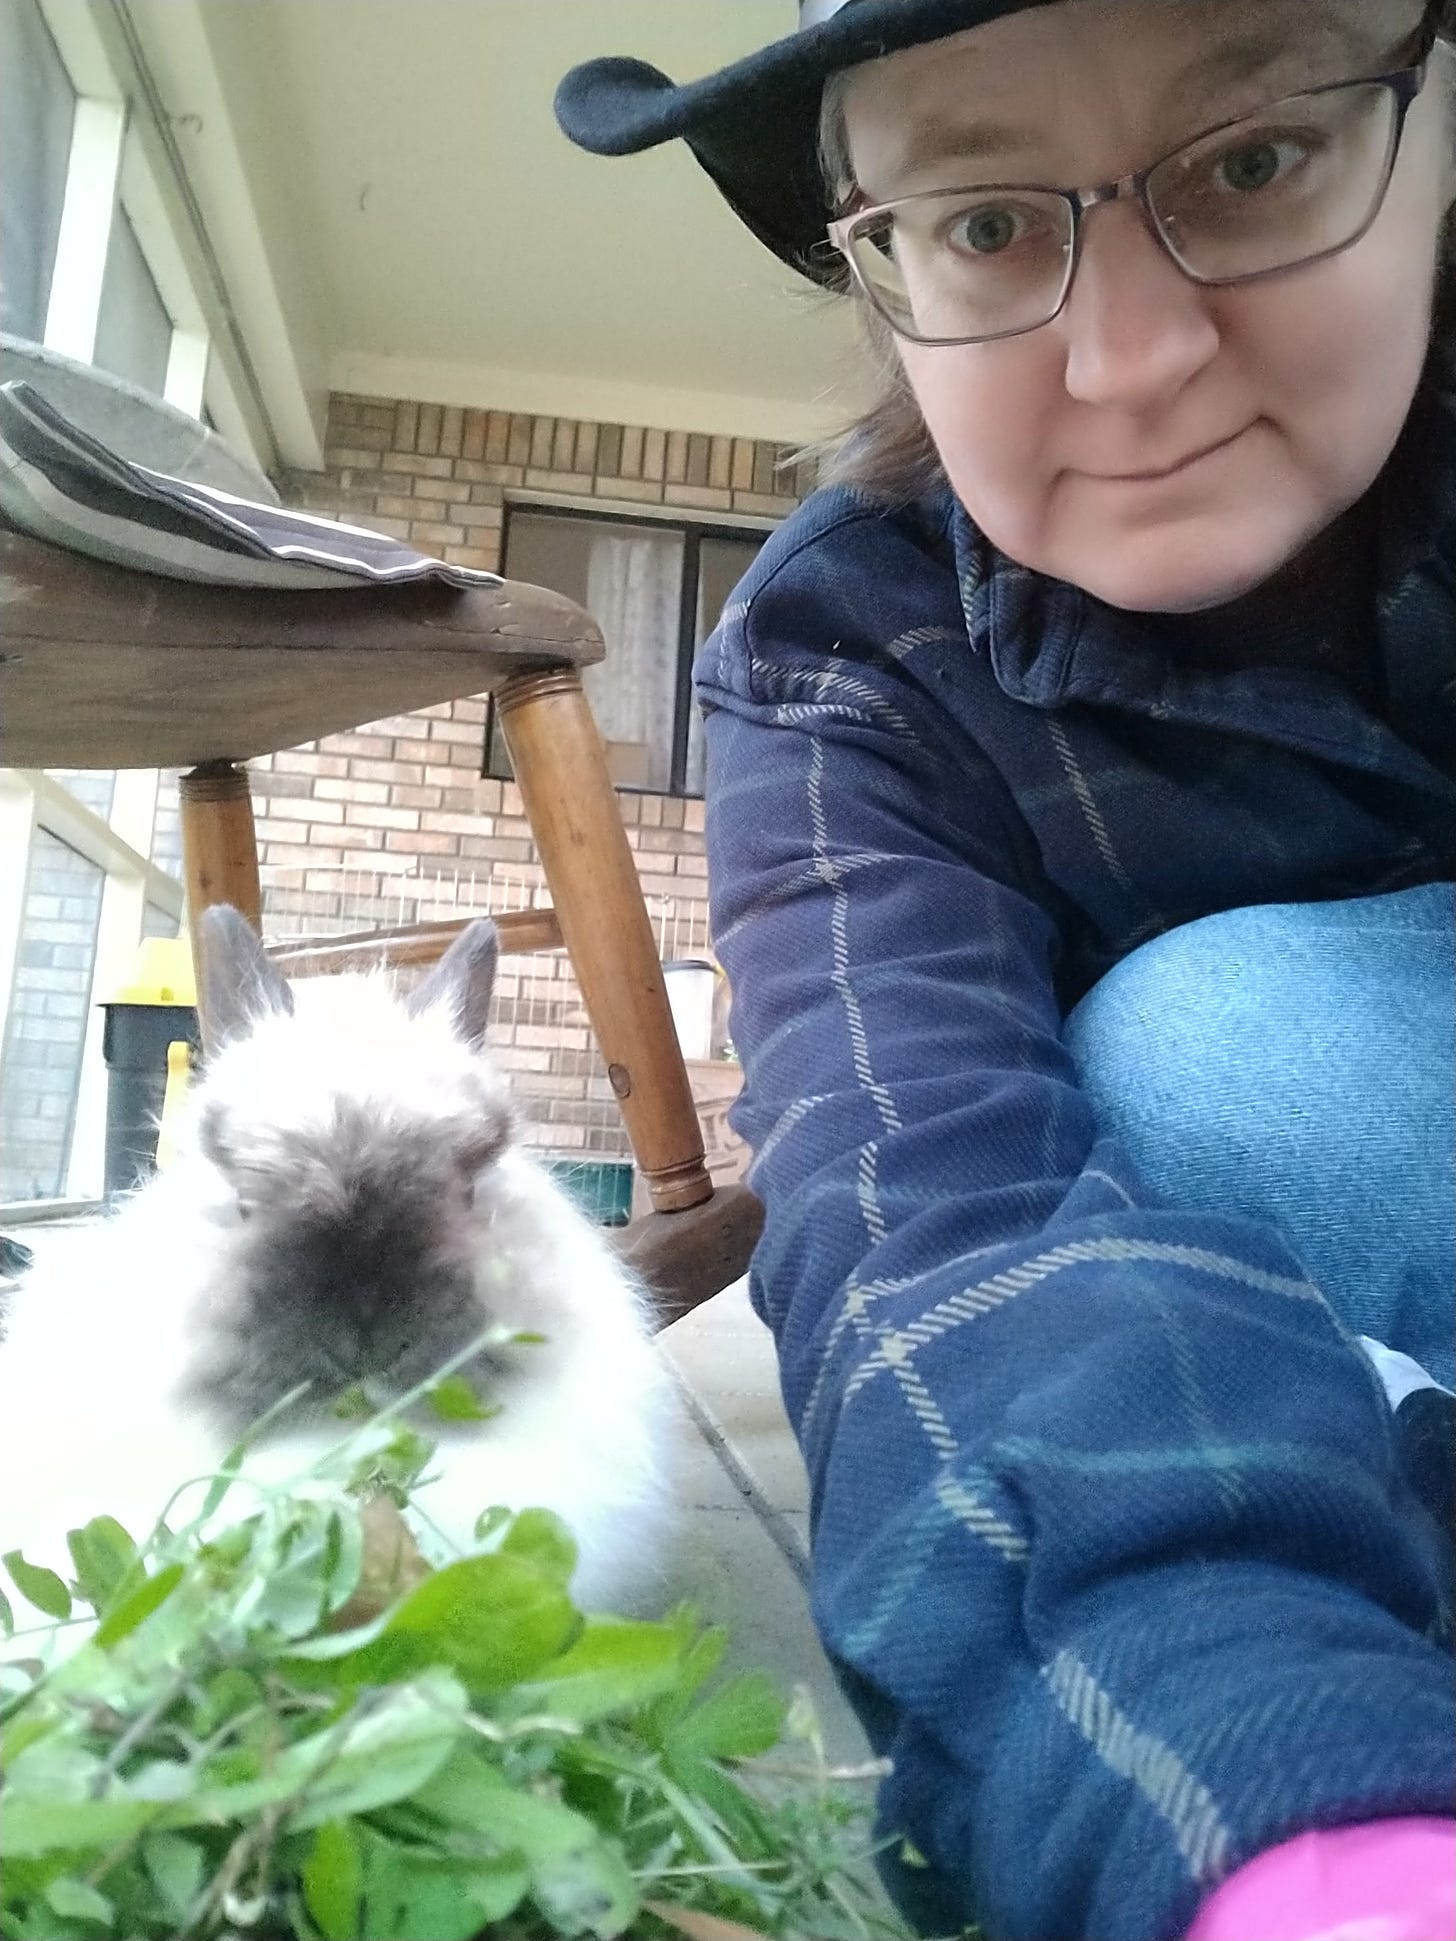 Old selfie of me and Miffy the Bunny, a fluffy white rabbit eating weeds from my yard.